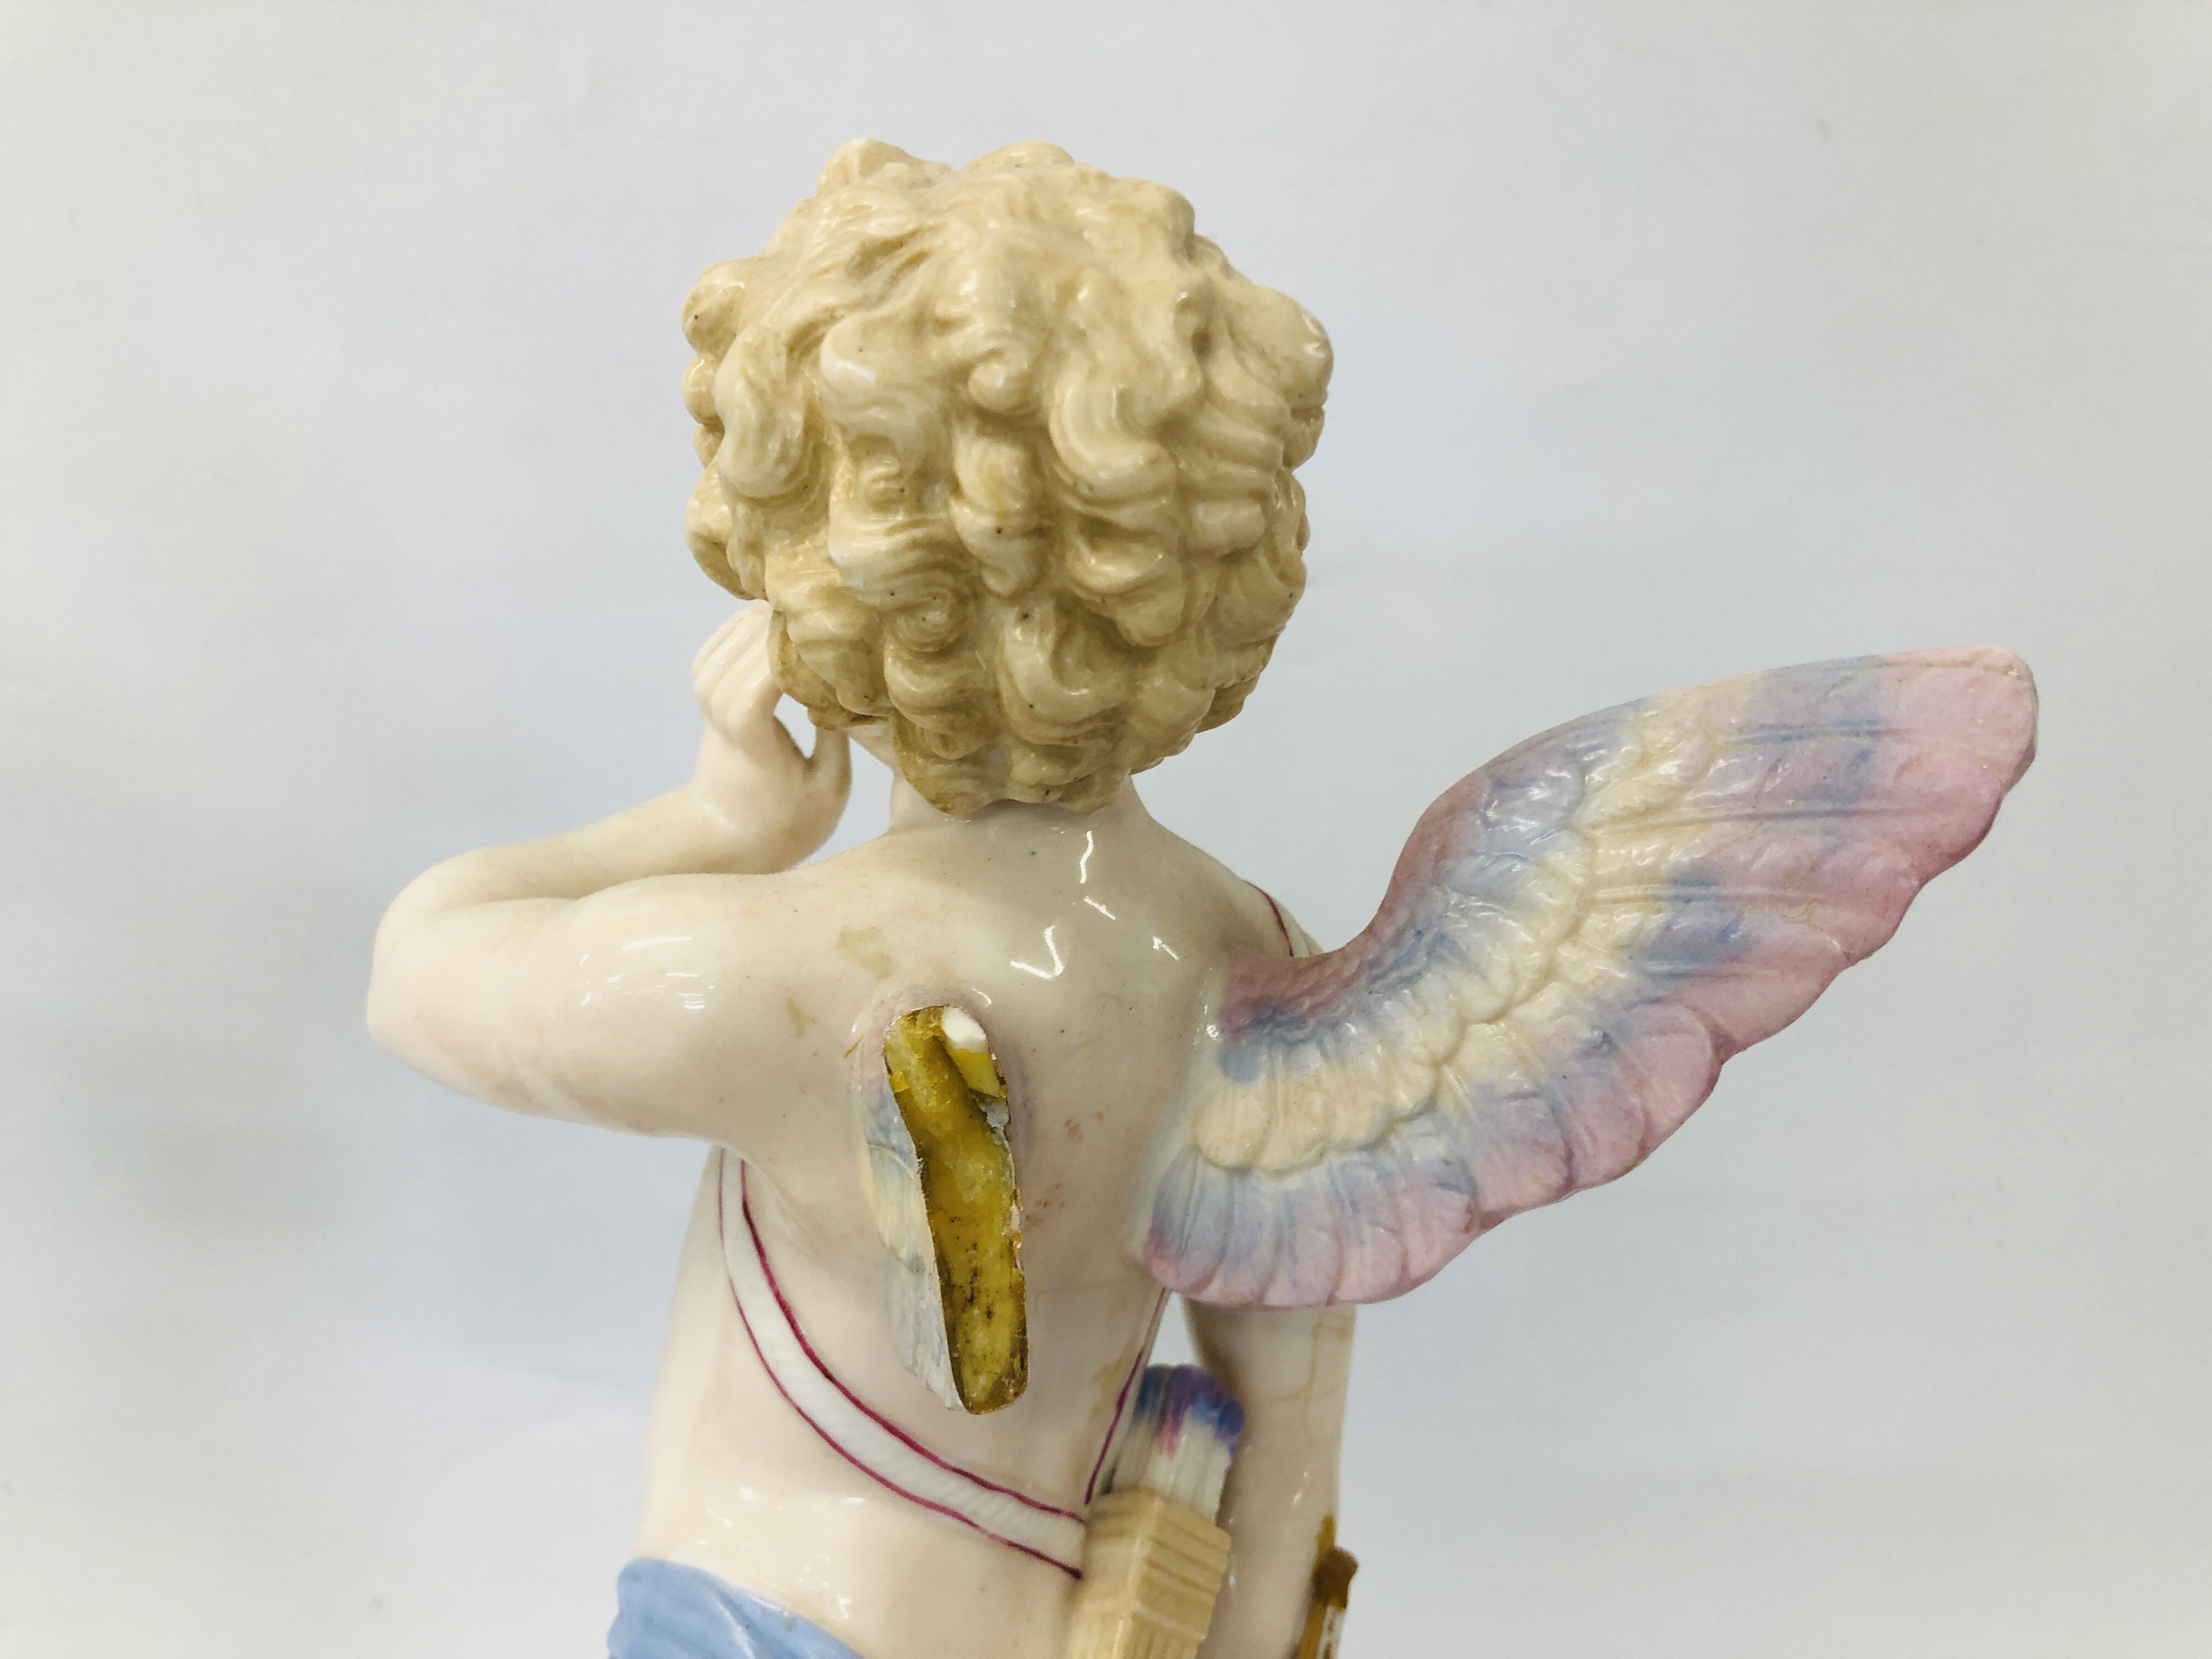 PAIR OF PORCELAIN CHERUB FIGURES INDISTINCT MAKERS MARK (A/F) H 36CM. - Image 6 of 6